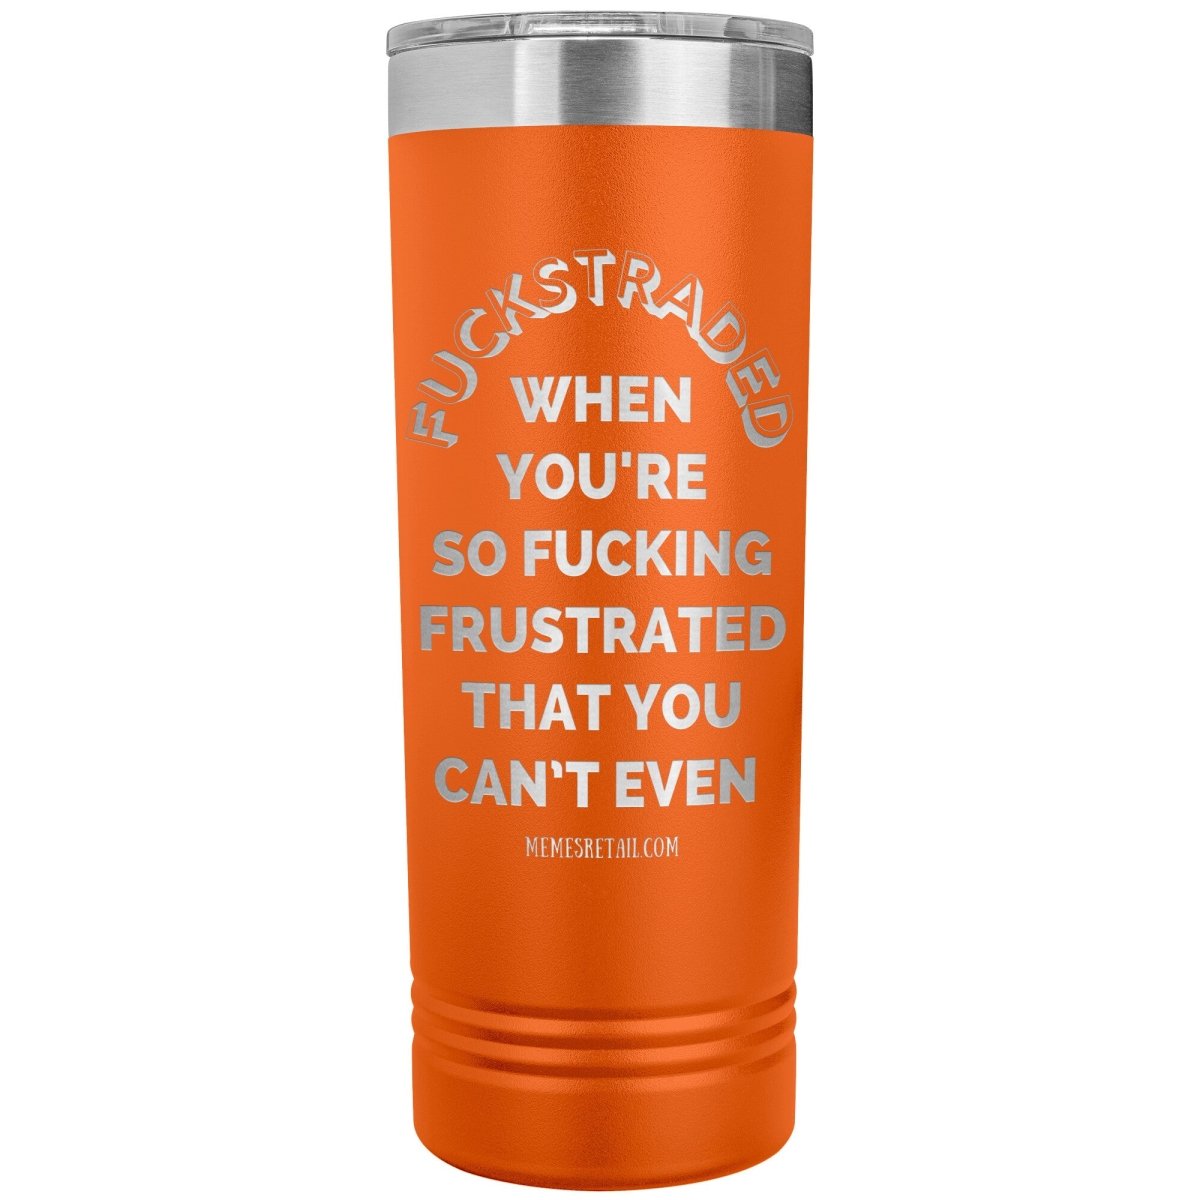 Fuckstraded, When You're So Fucking Frustrated That You Can’t Even - 22oz Skinny Tumblers, Orange - MemesRetail.com